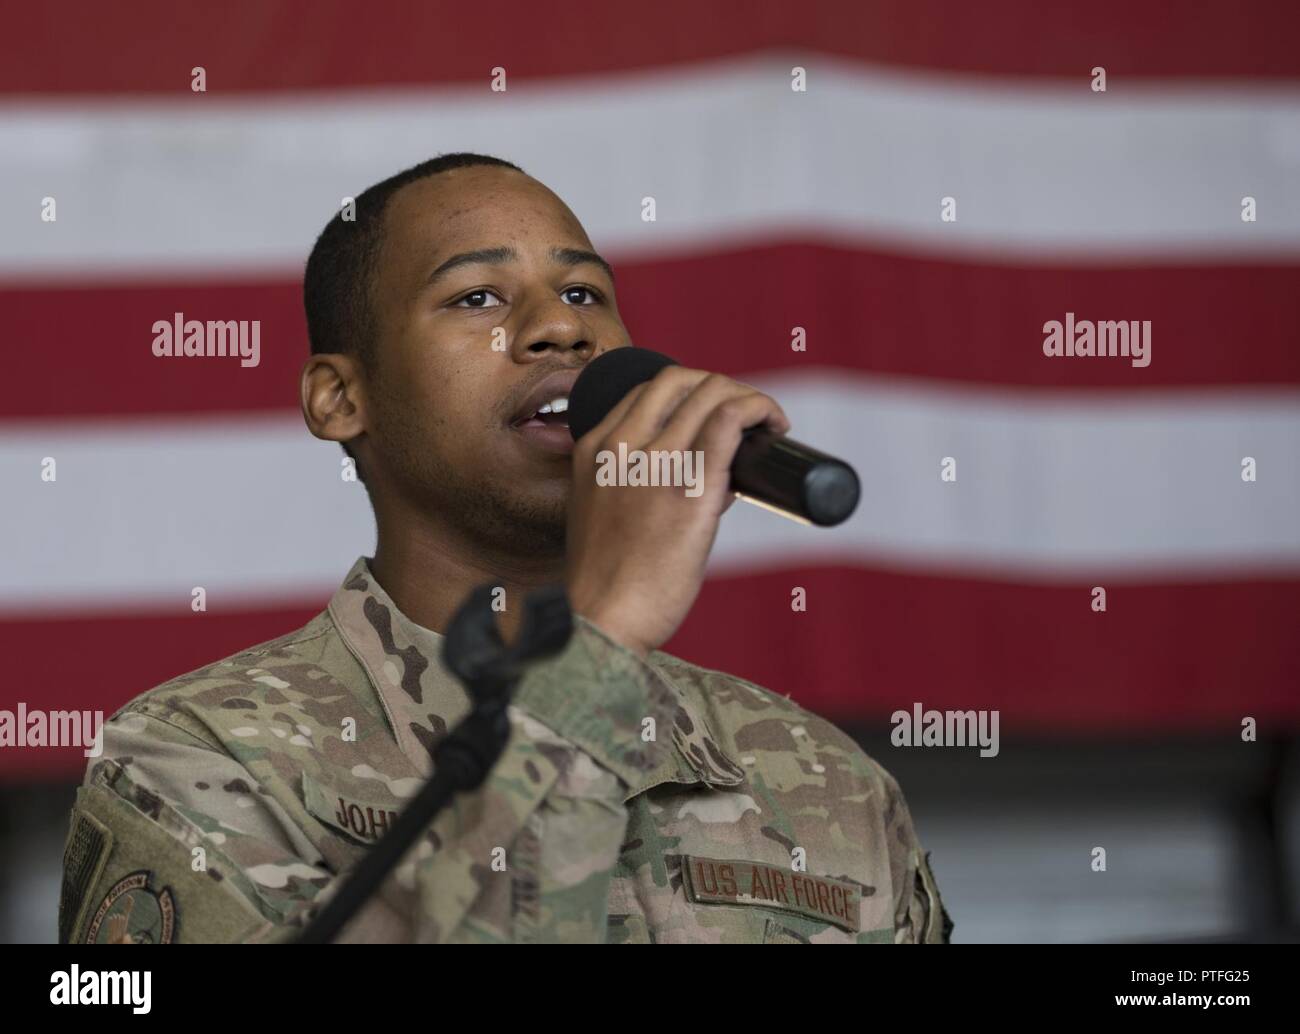 Senior Airman Calvin Johnson, 455th Security Forces Squadron, sings the national anthem during the 455th Expeditionary Mission Support Group change of command ceremony at Bagram Airfield, Afghanistan, July 20, 2017. During the ceremony, Col. Bradford Coley relinquished command of the 455th EMSG to Col. Phillip Noltemeyer. Stock Photo